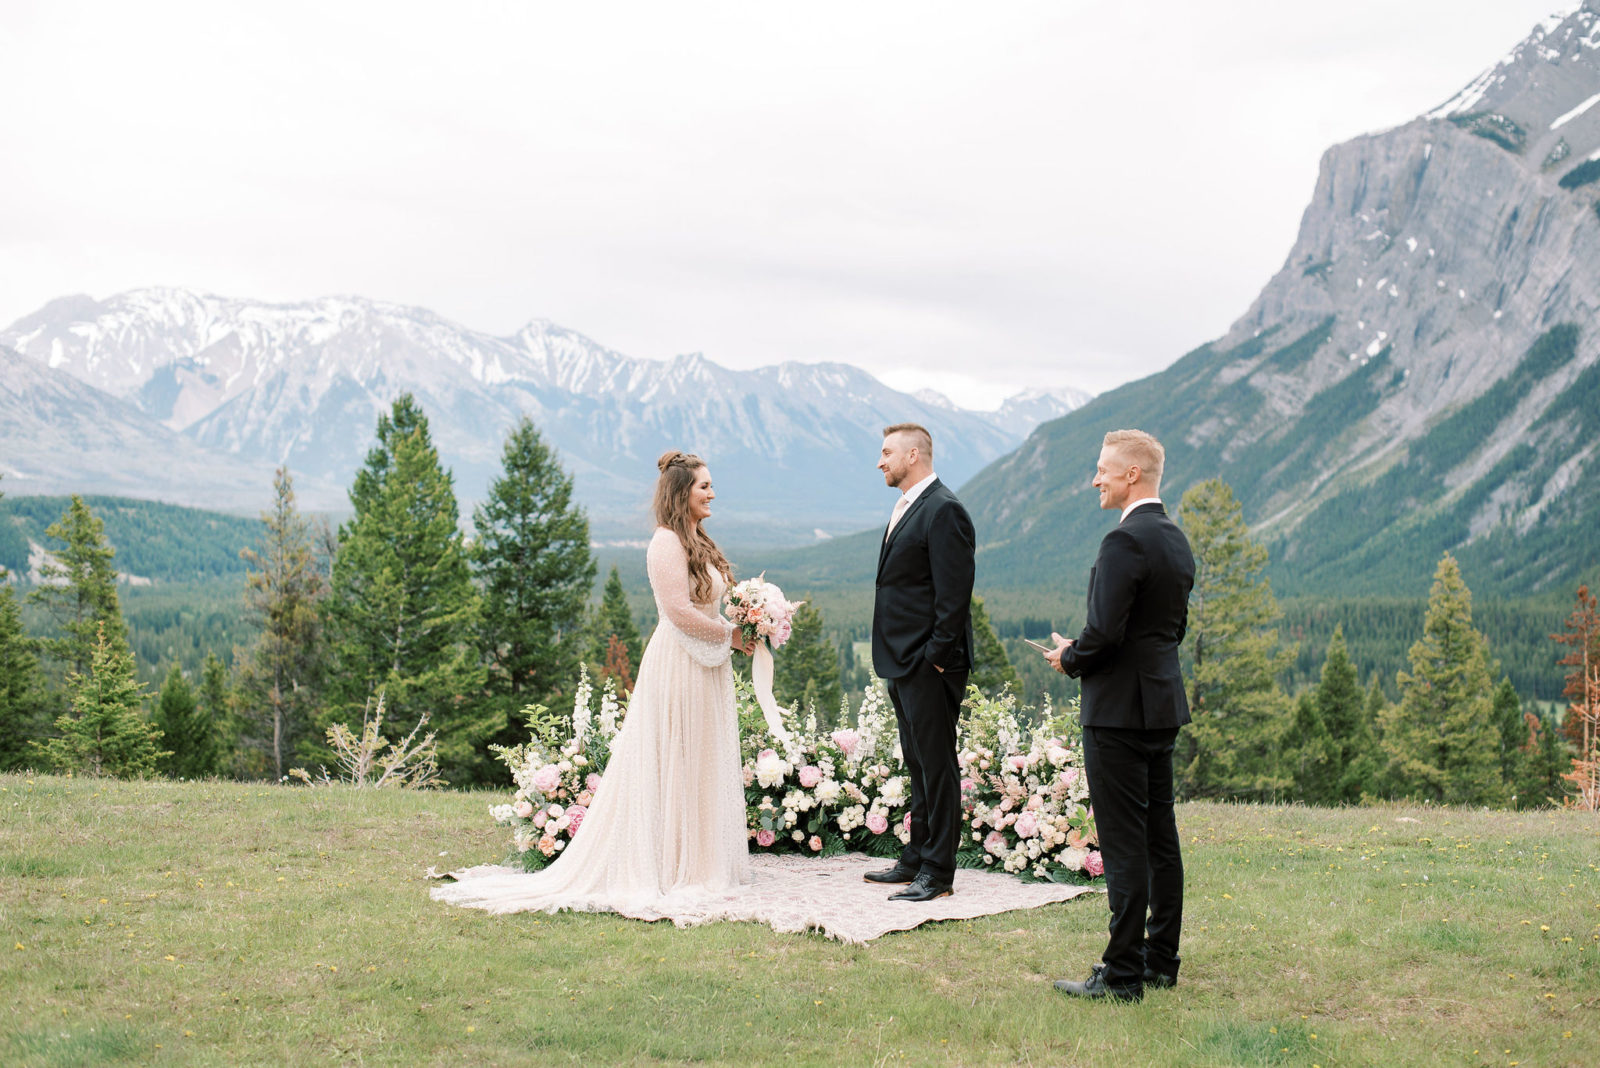 Bride and groom stand in front of a ground floral ceremony arch by Flowers by Janie for their elopement in Banff National Park